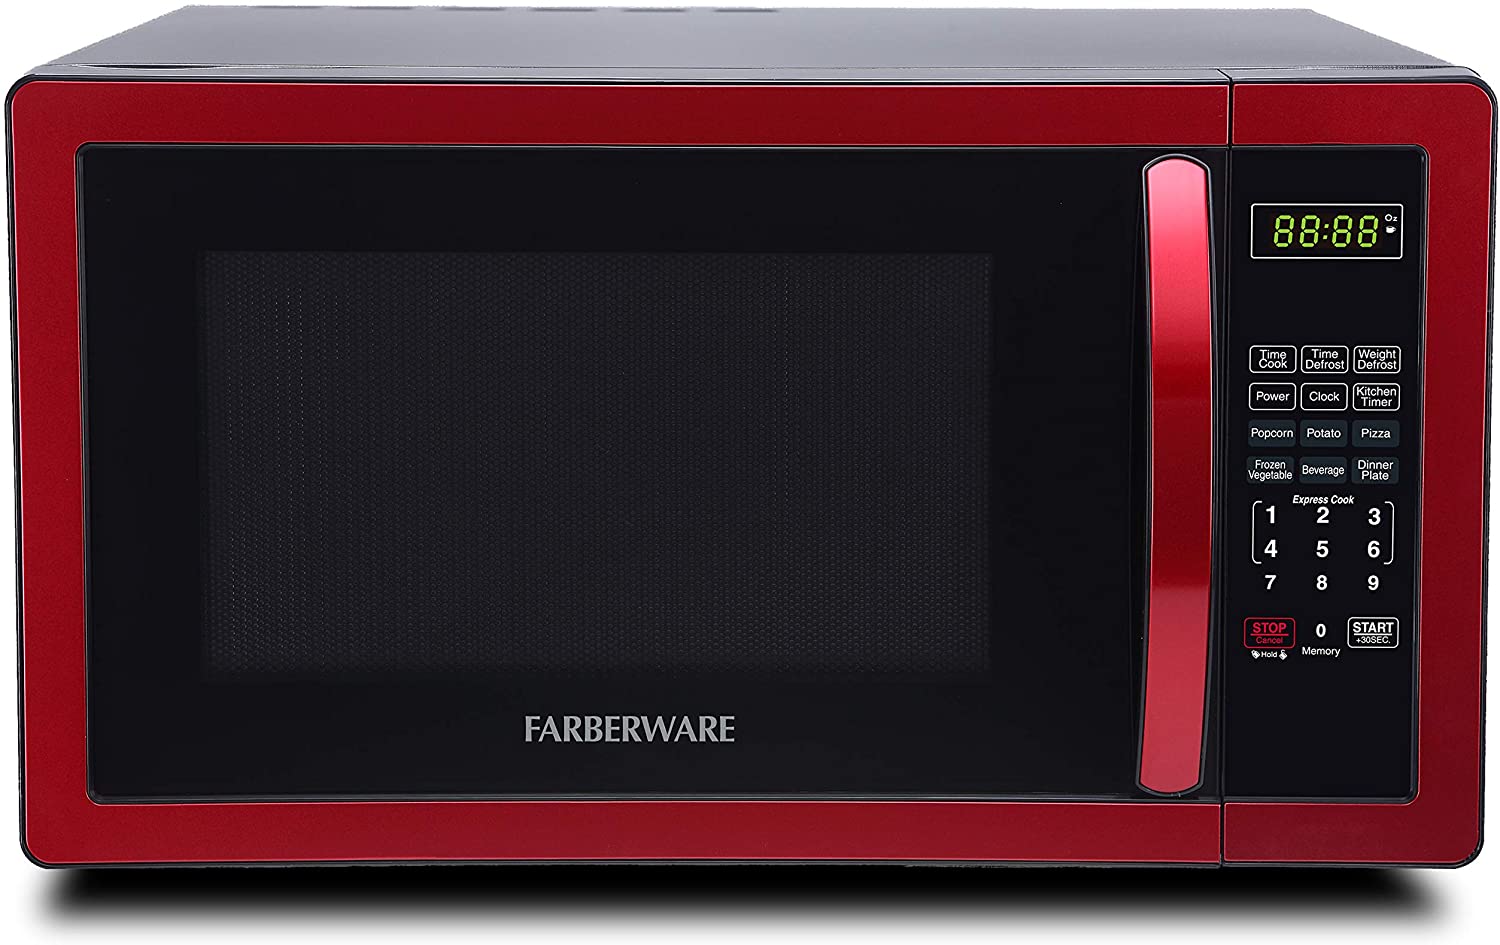 A red Farberware Classic compact microwave oven